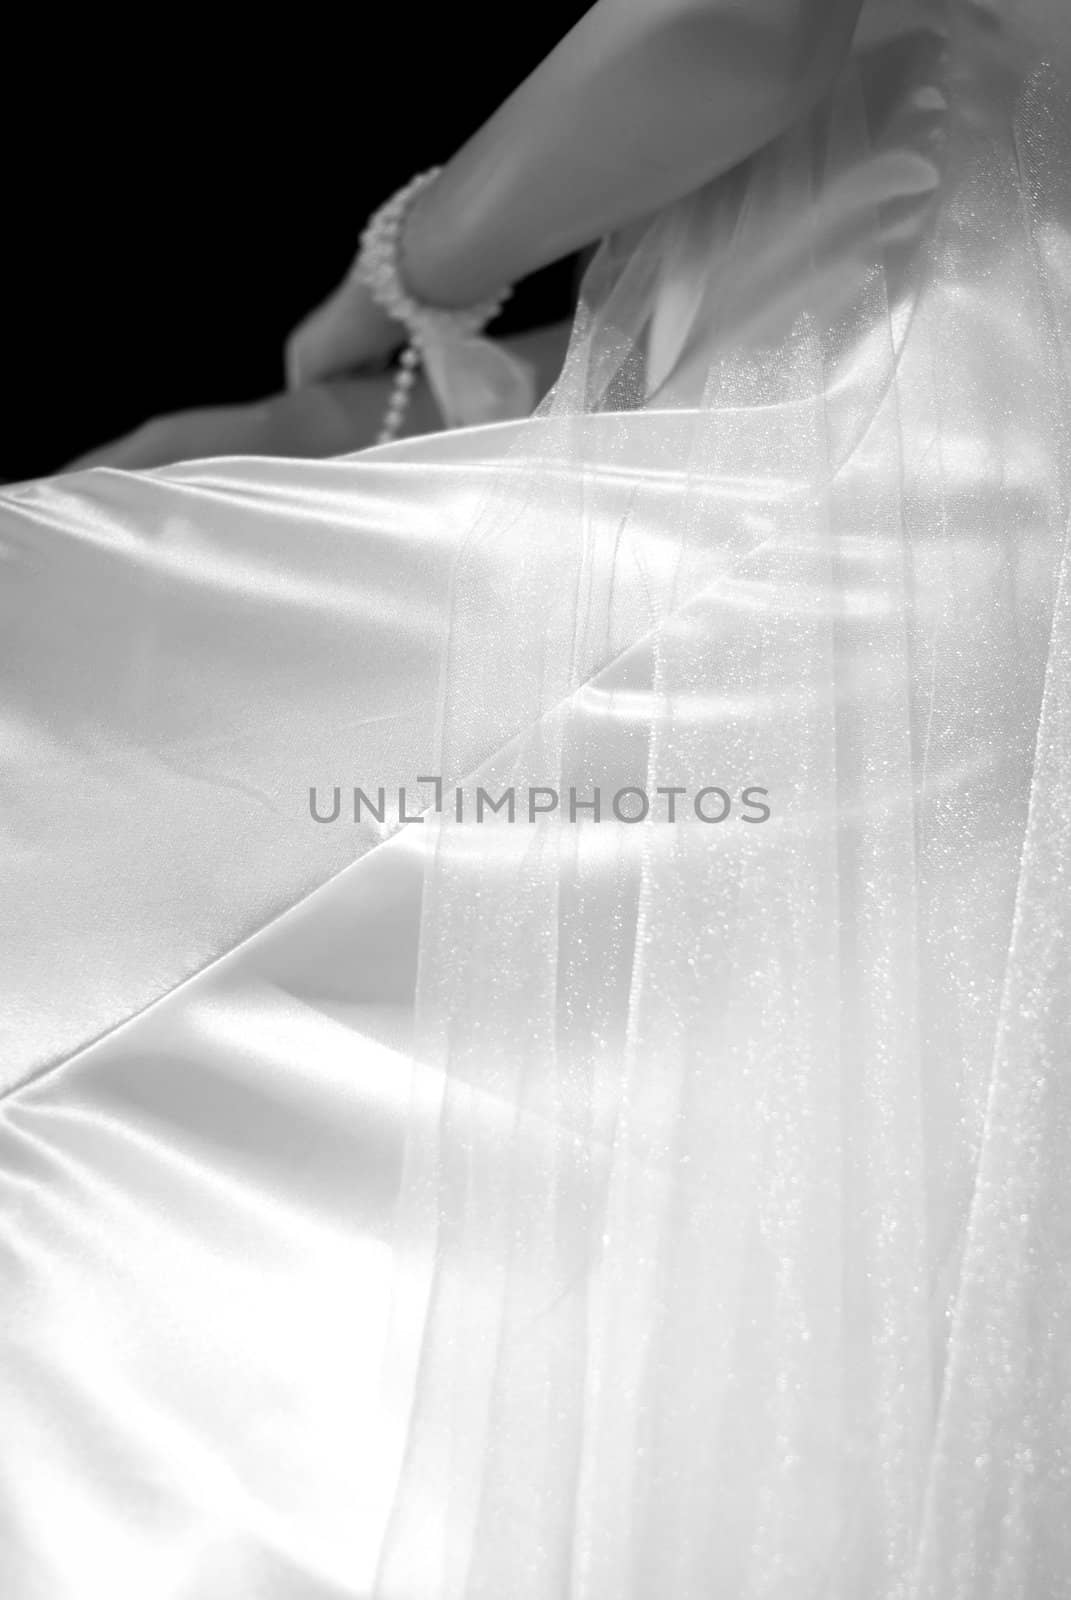 Silky shiny and thin translucent fabrics used in part of a wedding gown dressed on a mannequin